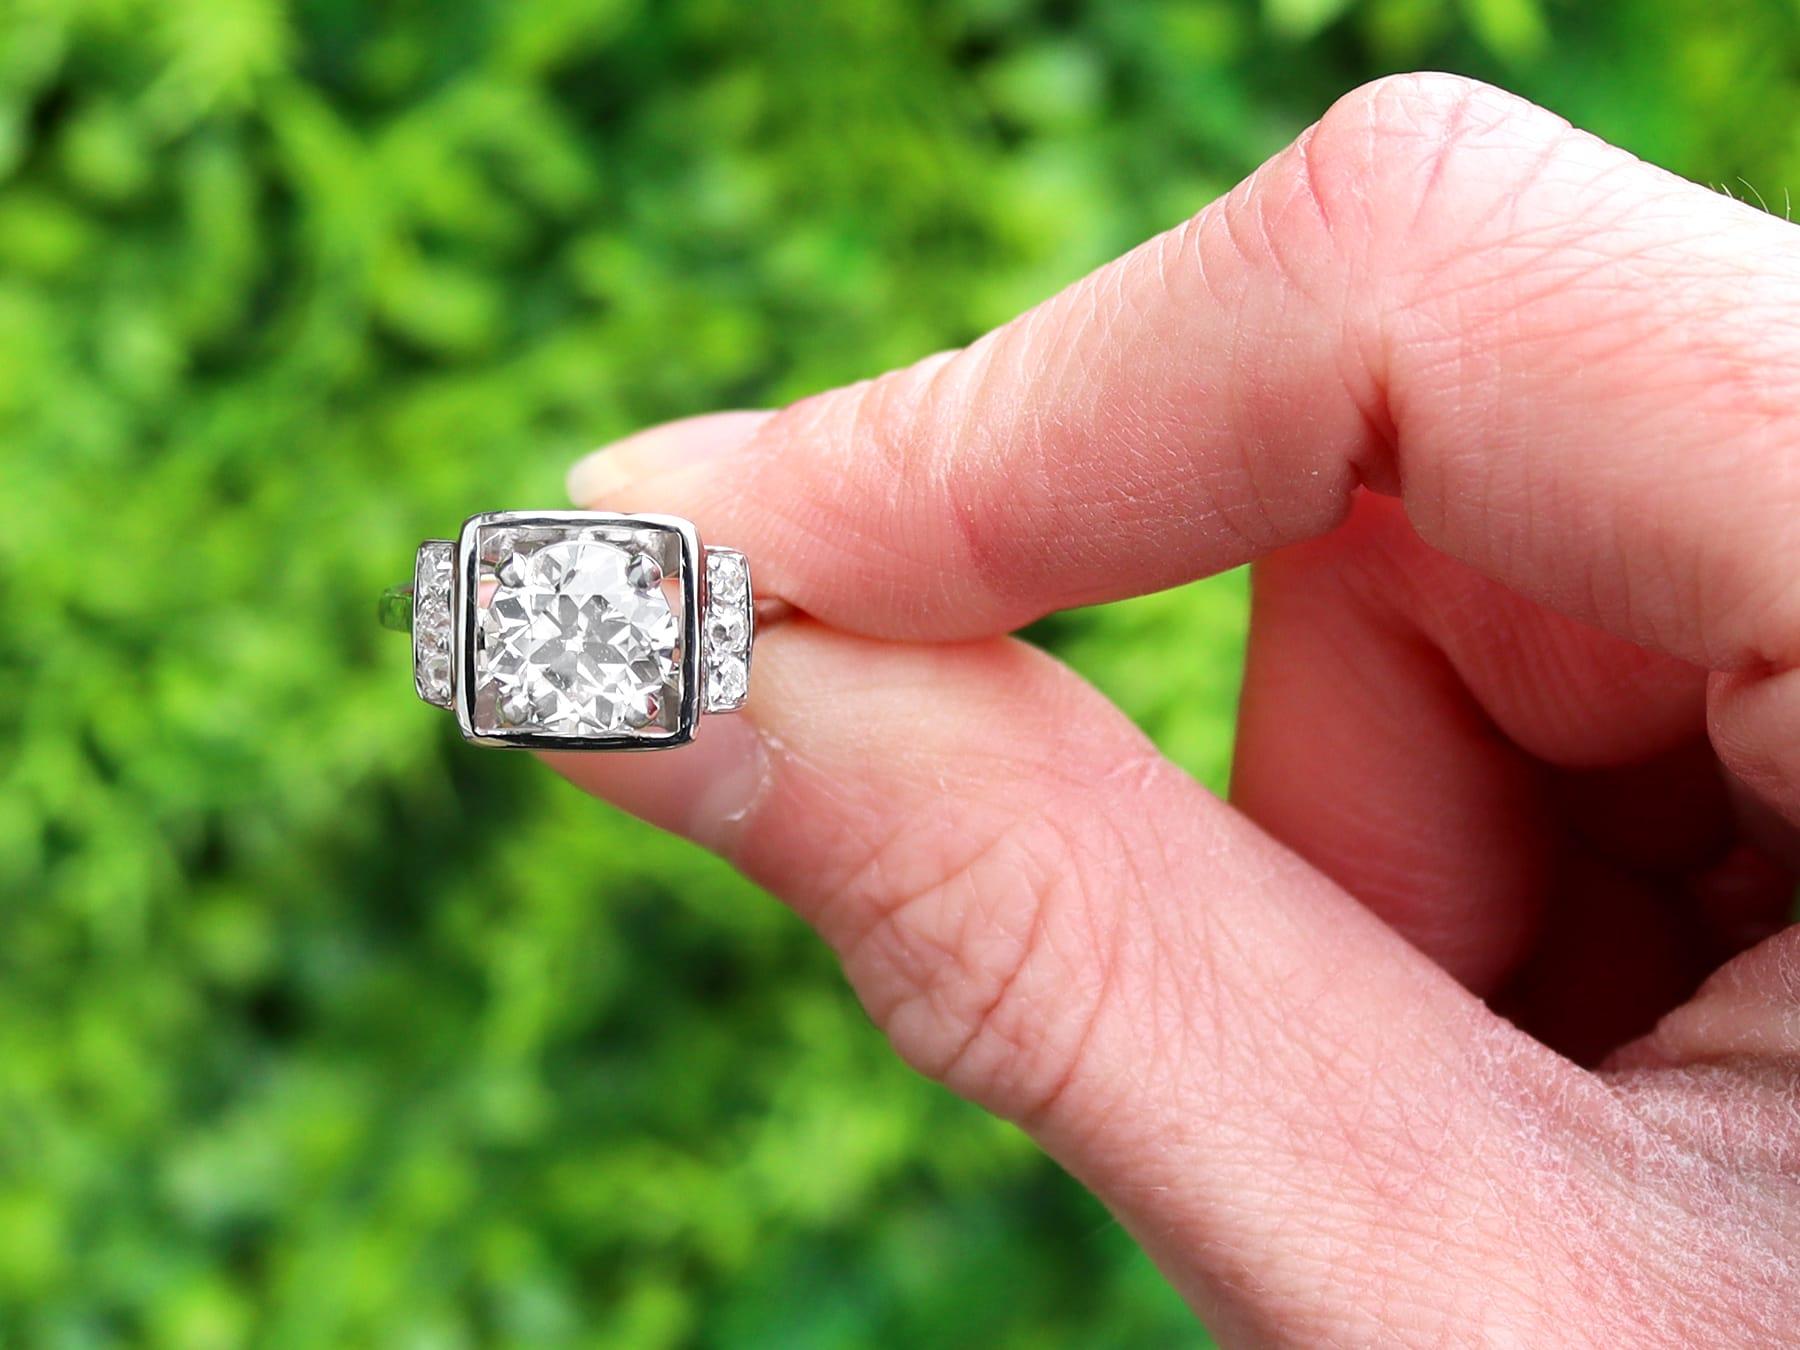 A stunning, fine and impressive antique 2.19 carat diamond and 18 karat white gold Art Deco solitaire ring; part of our diverse diamond jewellery and estate jewelry collections.

This stunning, fine and impressive diamond ring has been crafted in